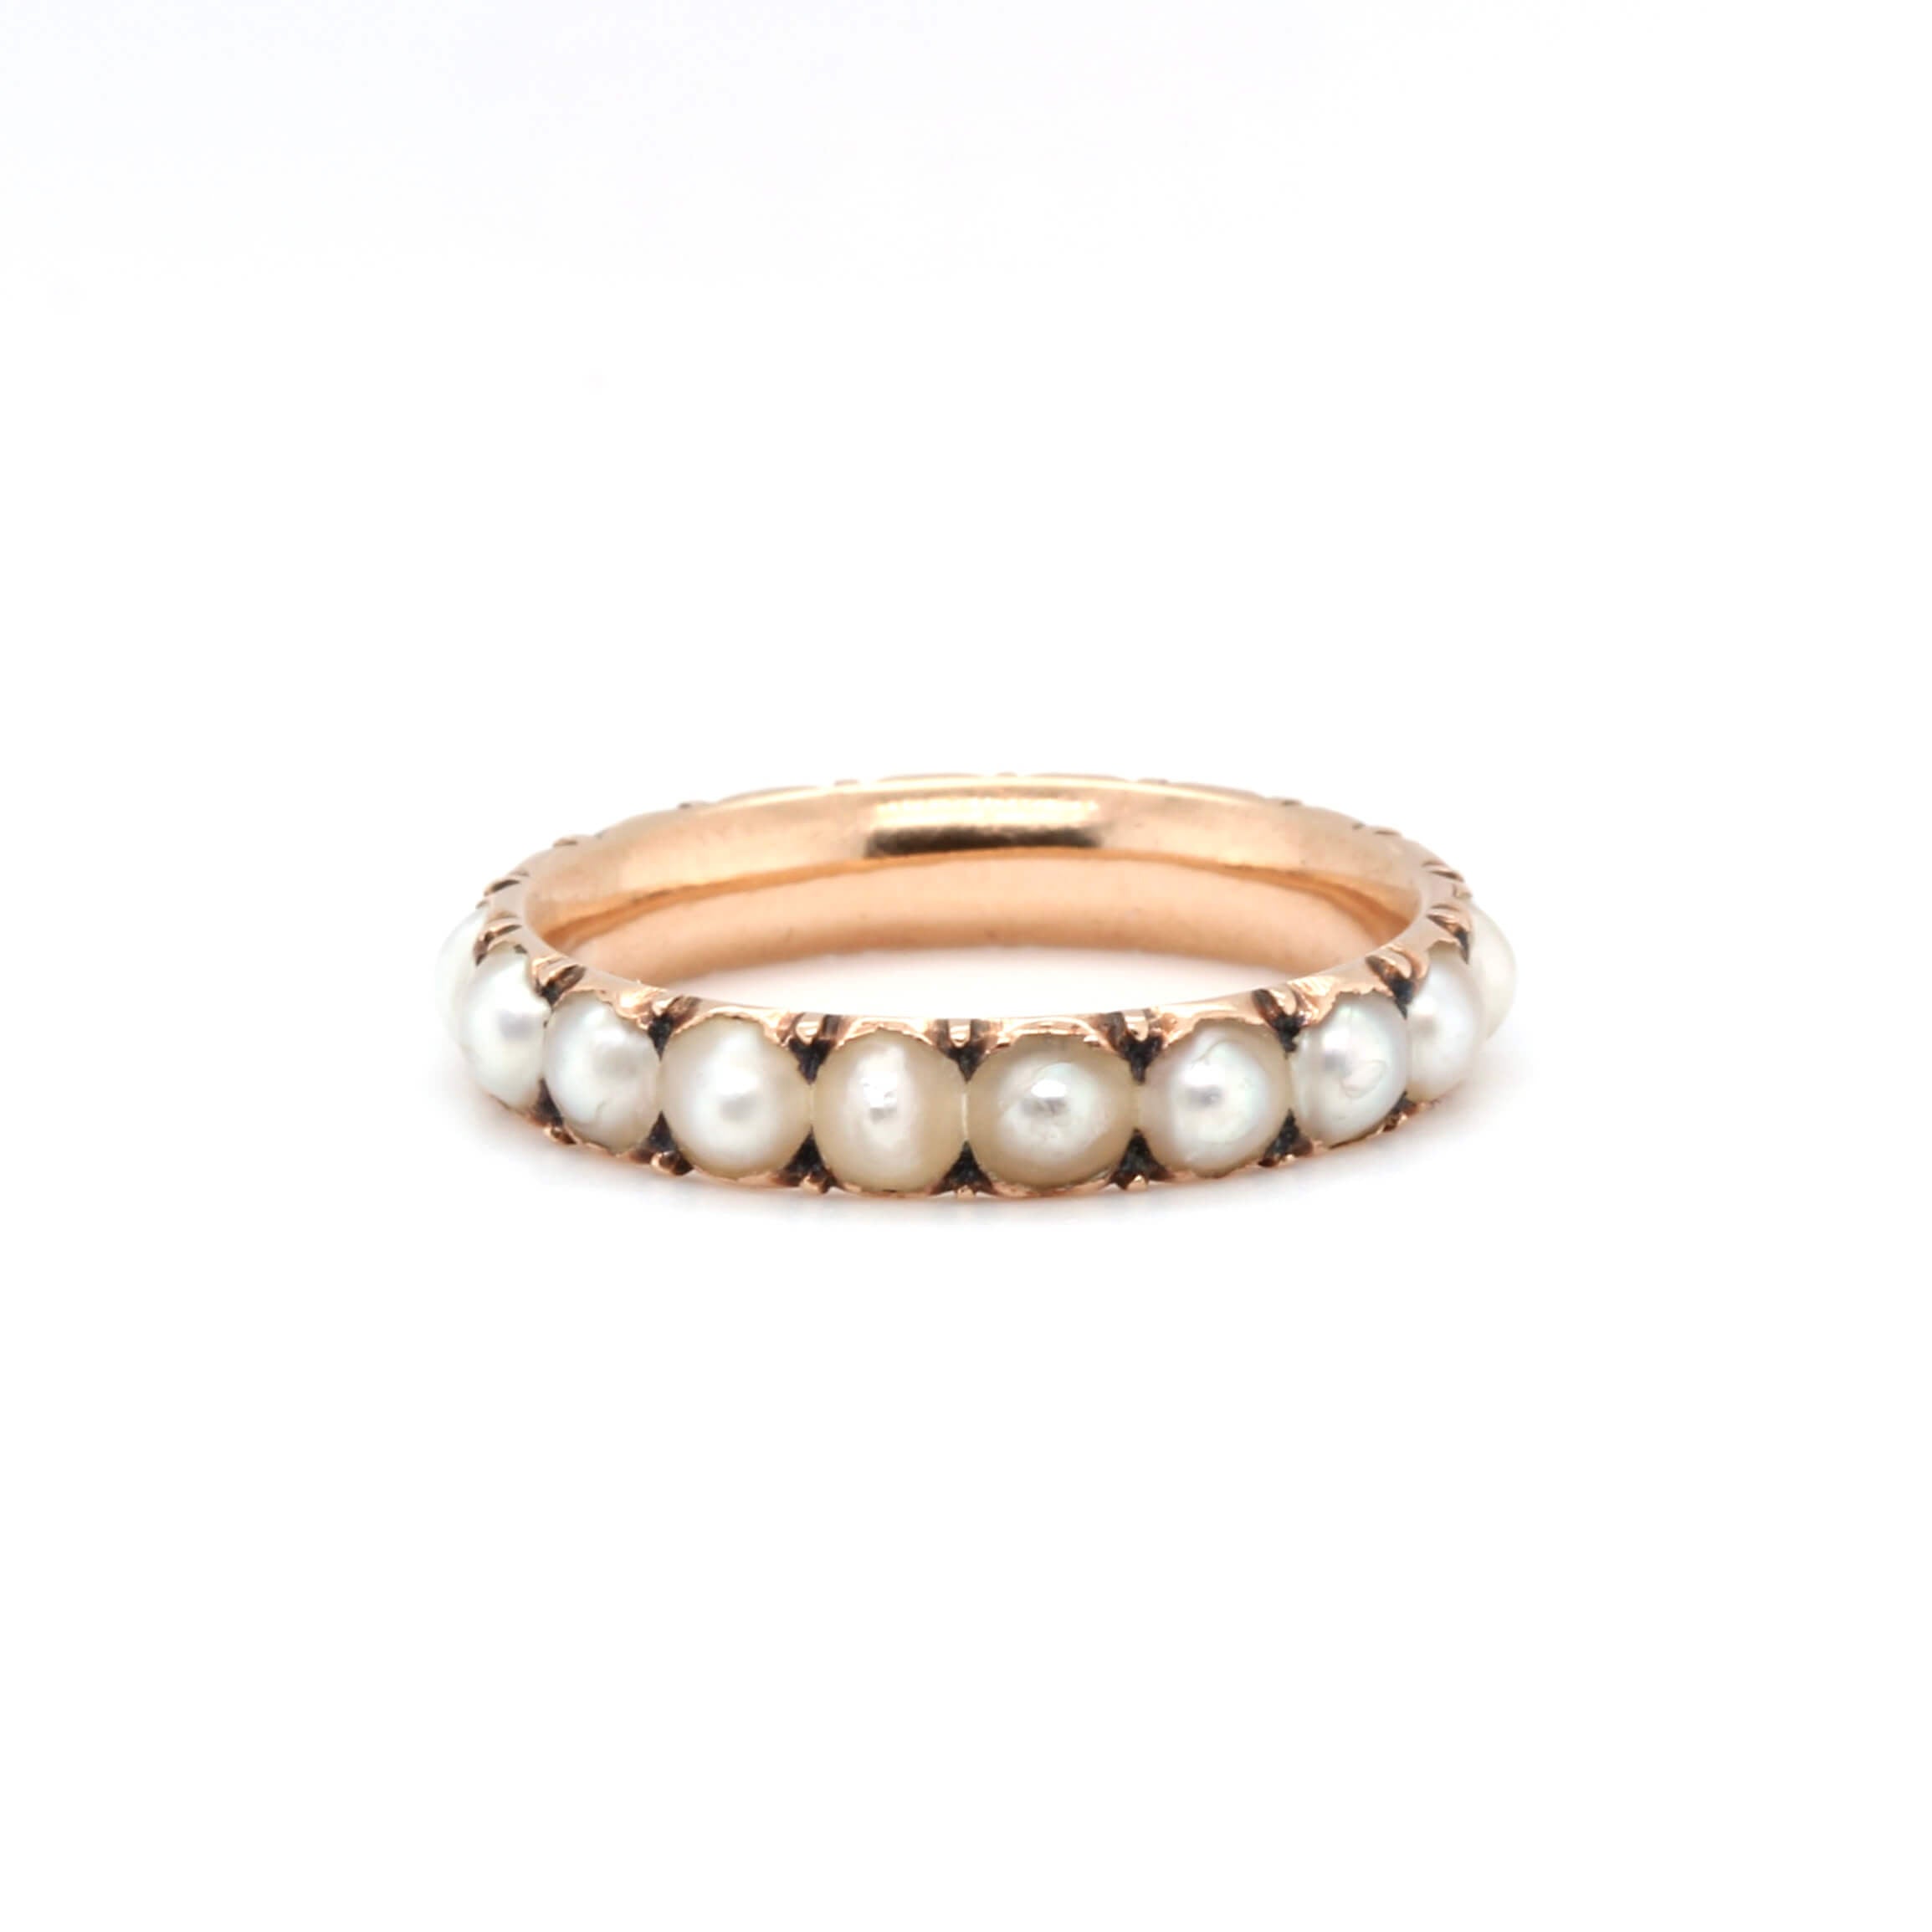 Antique Pearl Ring 835 Silver 18K Rose Gold Portugal | eBay